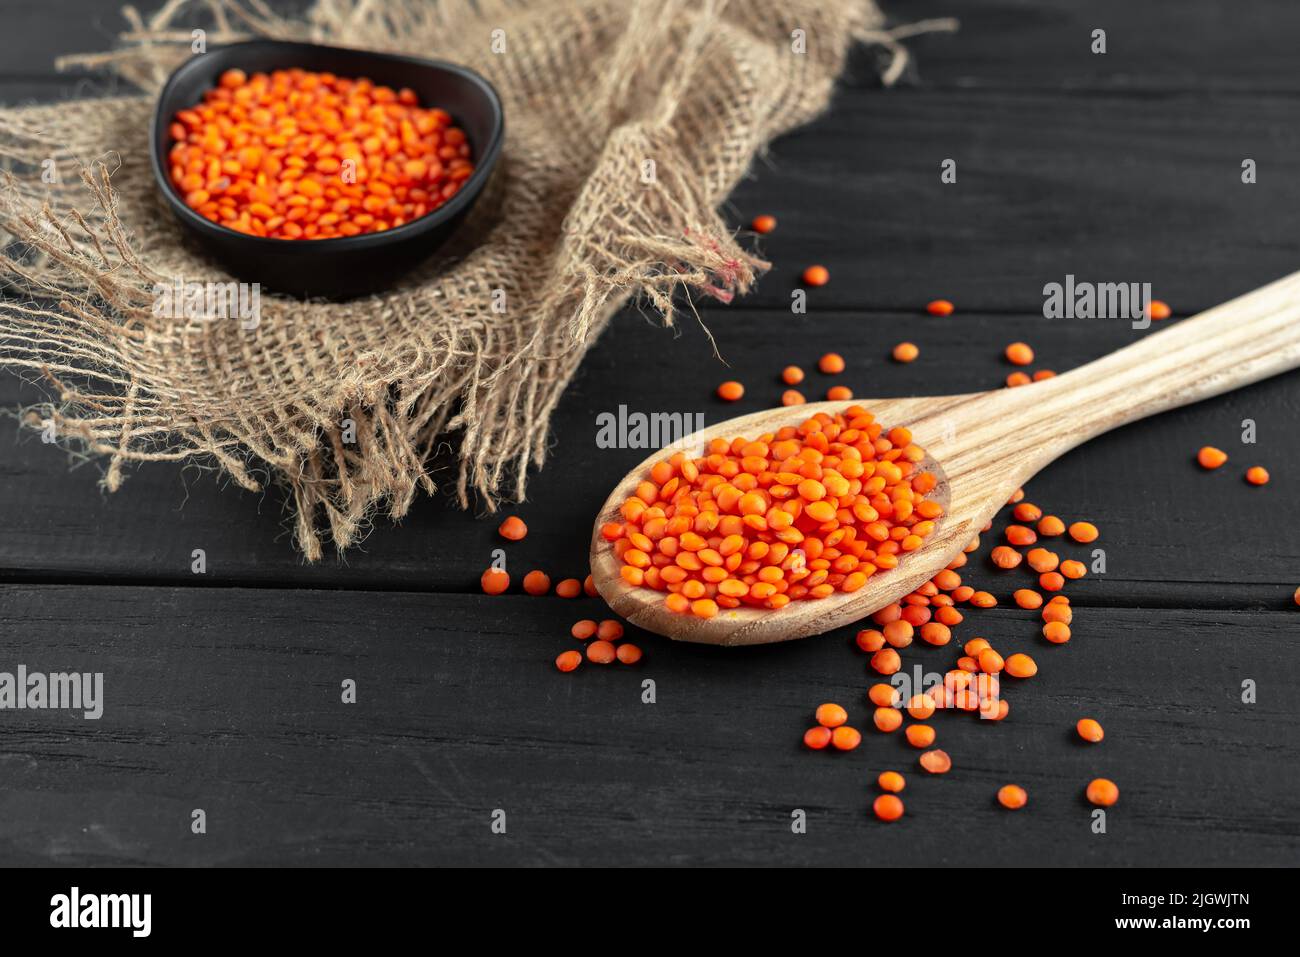 Superfood. Healthy, gluten-free meals. Lentils on a wooden spoon on a rustic dark wooden background Stock Photo